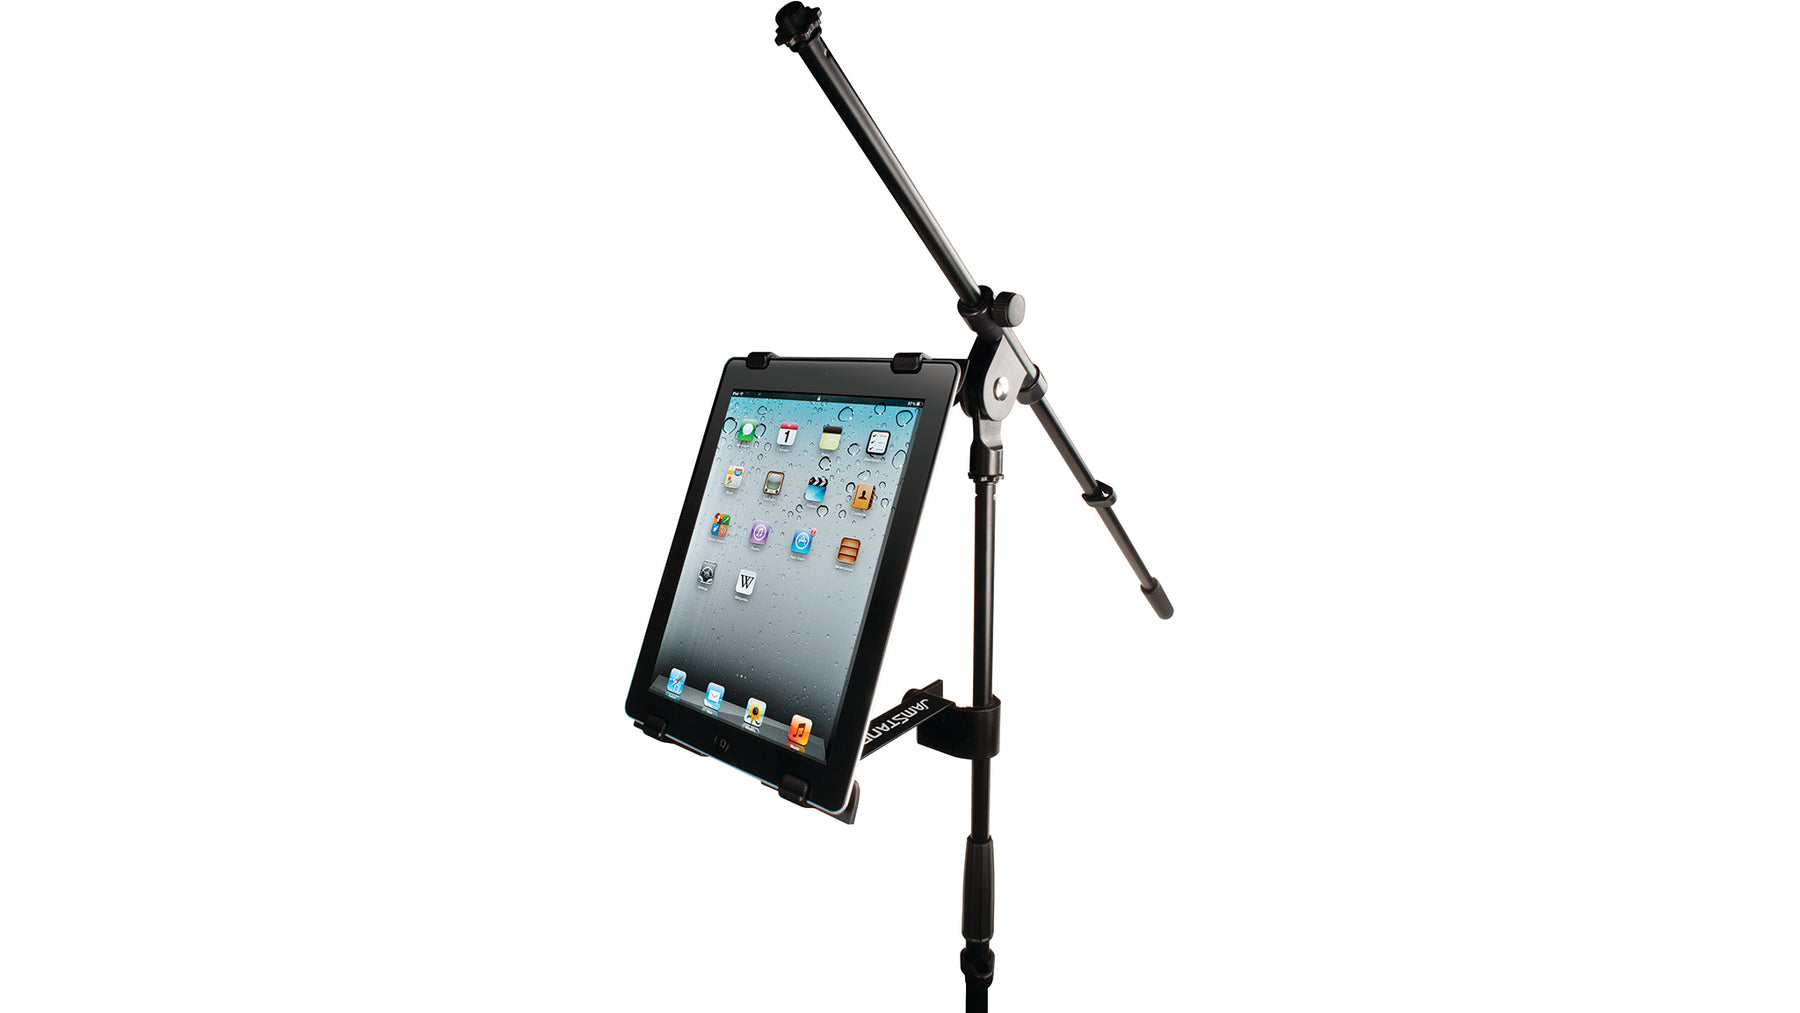 Universal Microphone Stand Double Cell Phone Holder Tablet Clamp 1